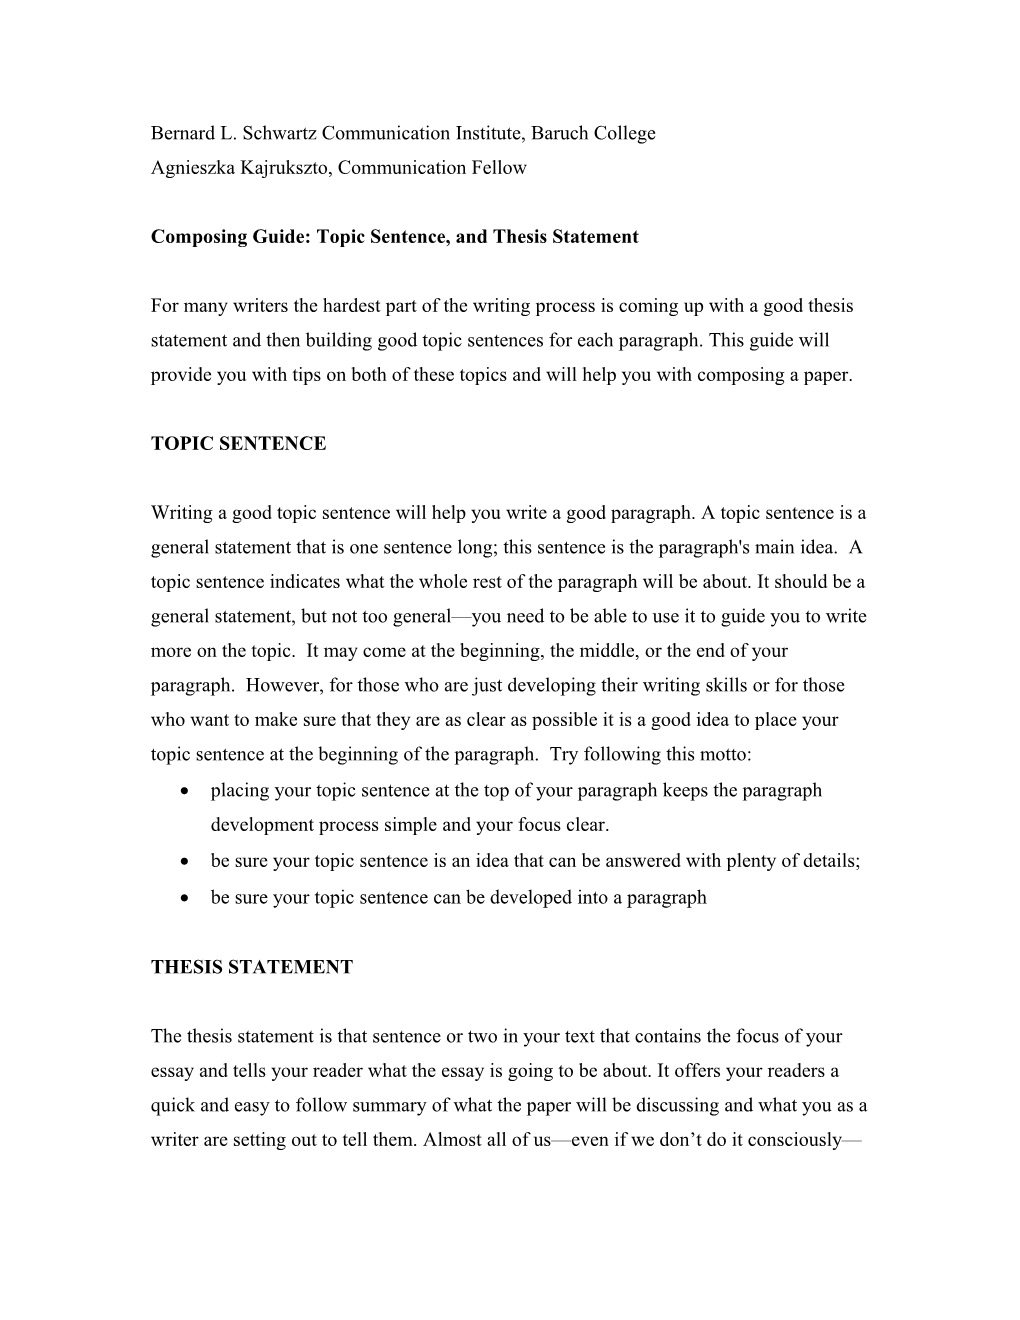 Composing Guide: Topic Sentence, and Thesis Statement